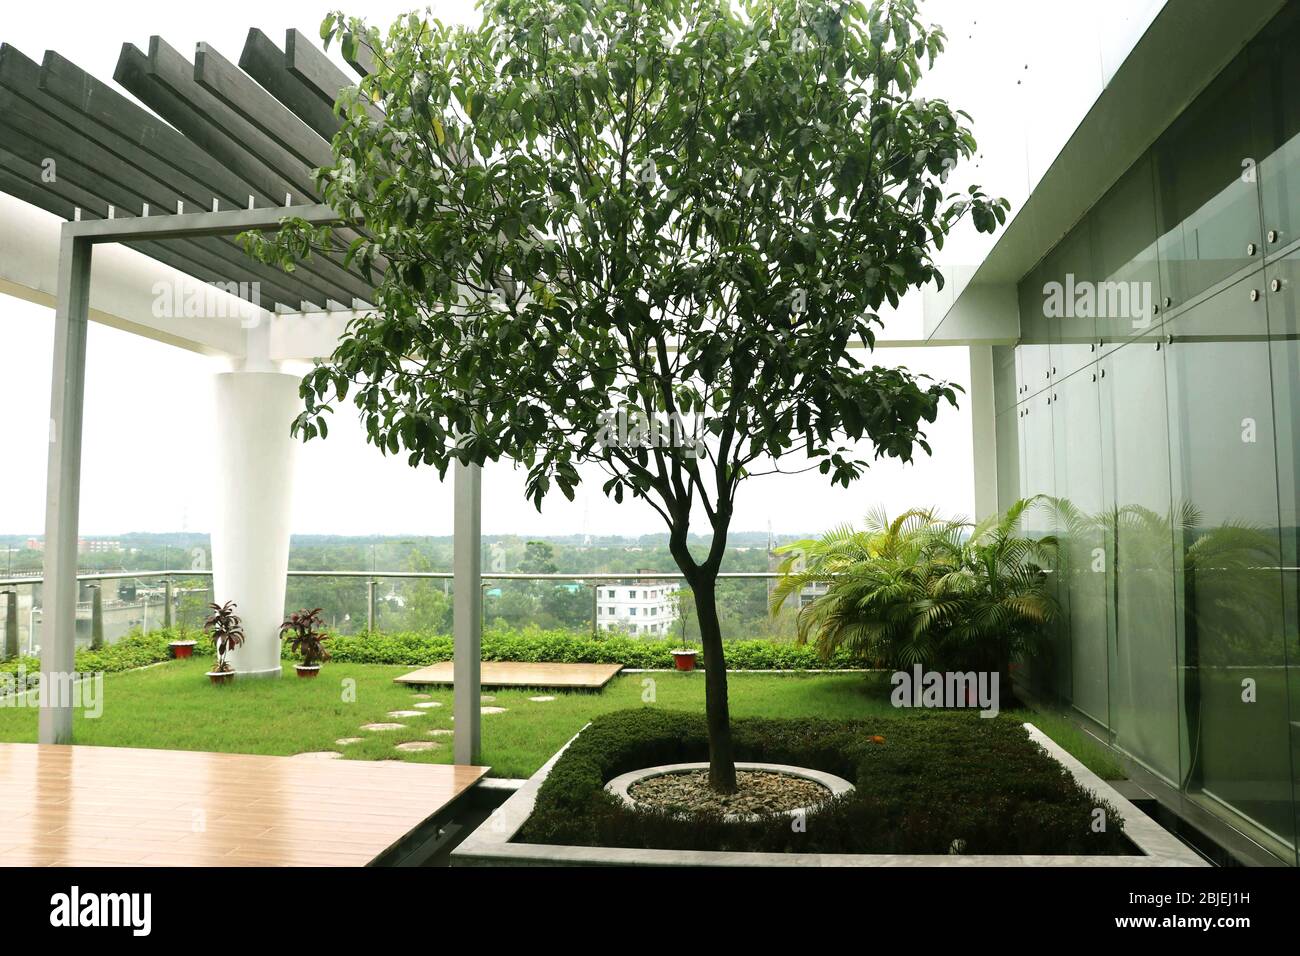 Design of a roof top garden with some beautiful green tree and other materials, environmental beauty Stock Photo